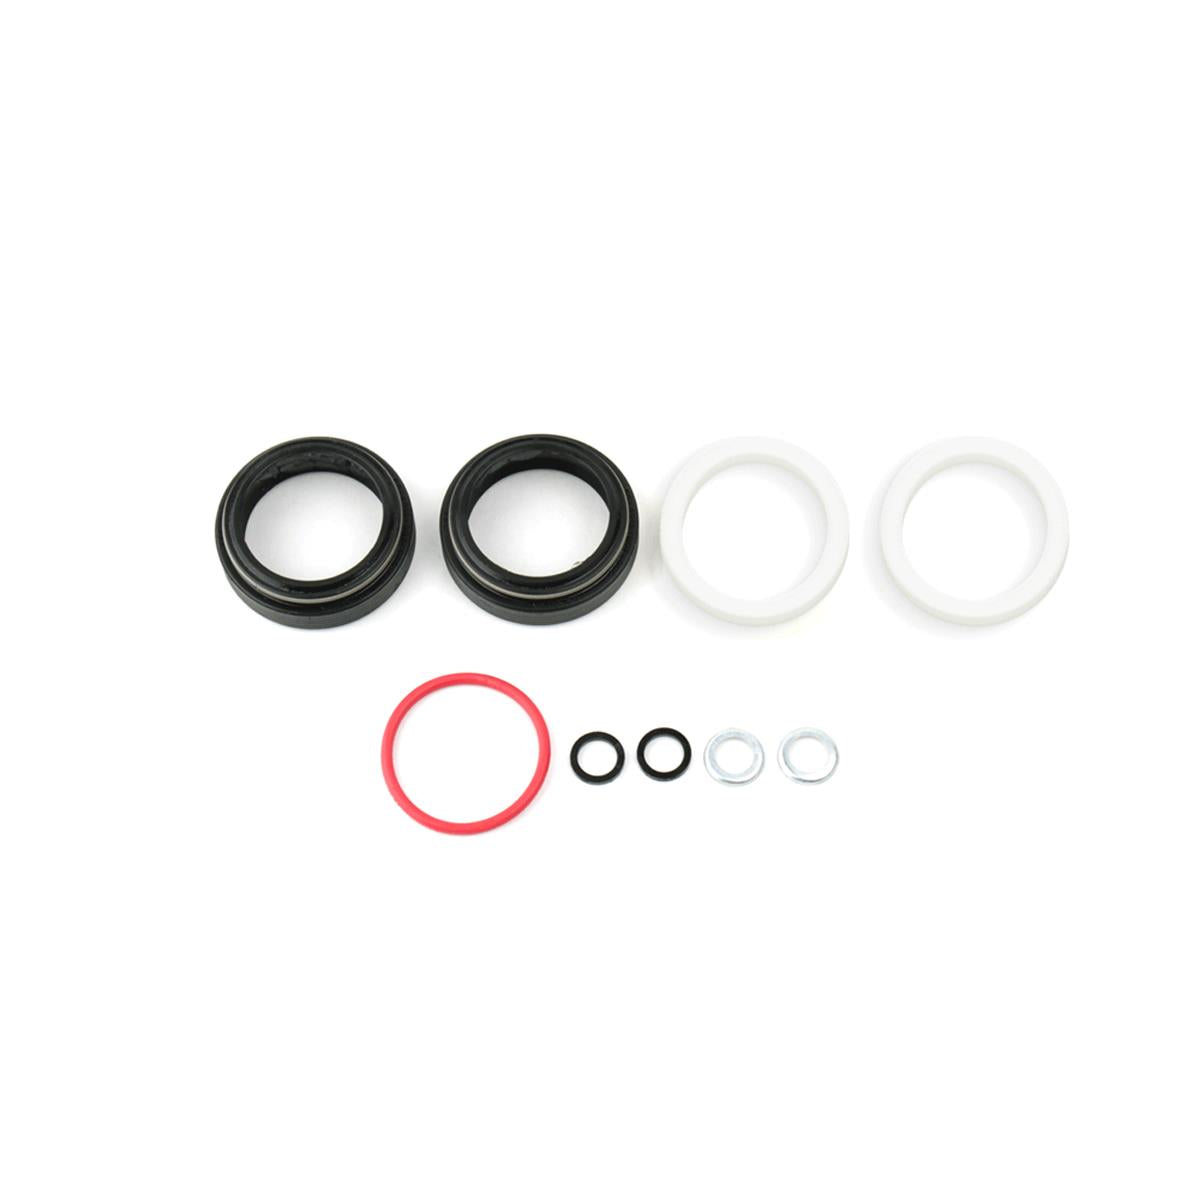 Rockshox Spare -  Fork Dust Wiper Upgrade Kit - 30Mm Black Flangeless Low Friction Seals (Includes Dust Wipers & 10Mm Foam Rings) - Judy Silver/Judy Gold (Boostô Forks)/Rudy 2021